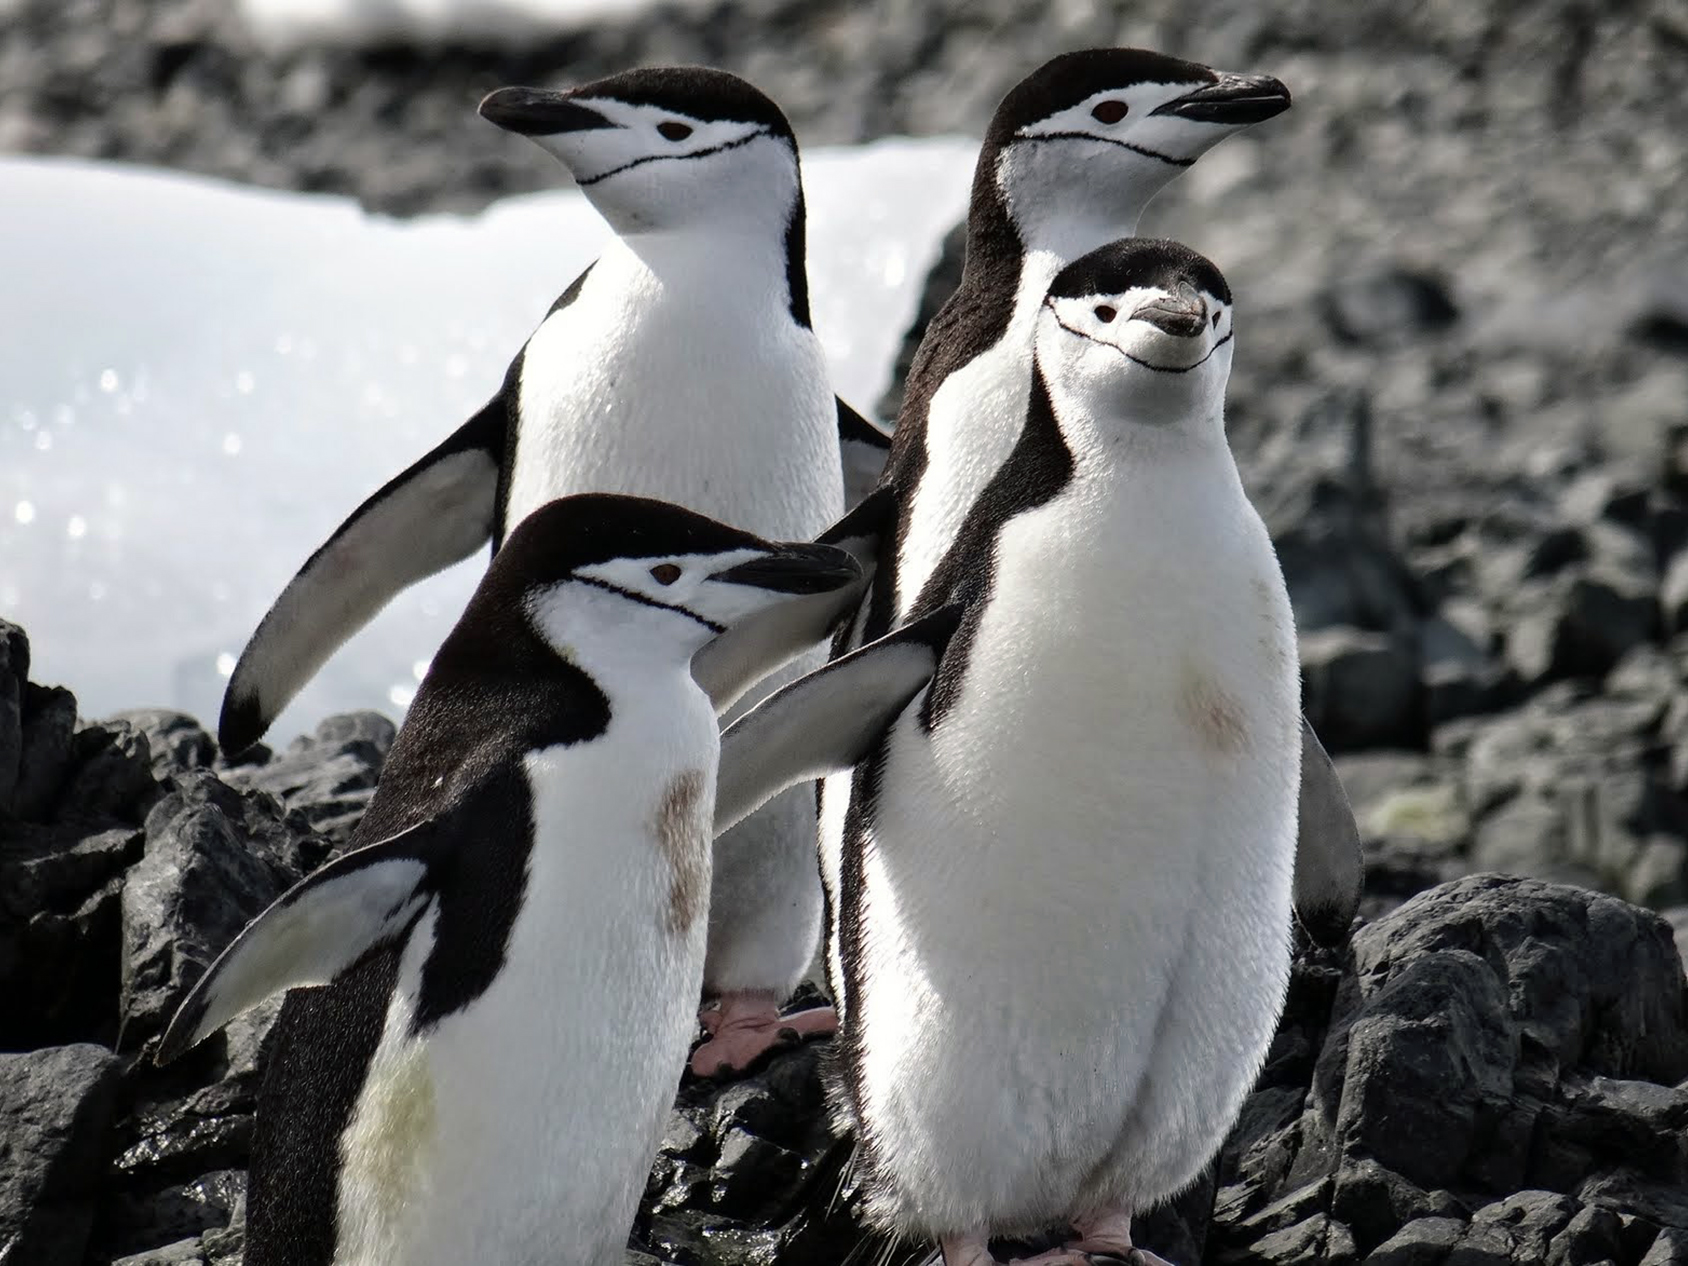 Our first encounter with the white and black ambassadors of Antarctica took place a day and a half into our journey, when we came across a colony of chinstrap penguins on Barrientos Island.